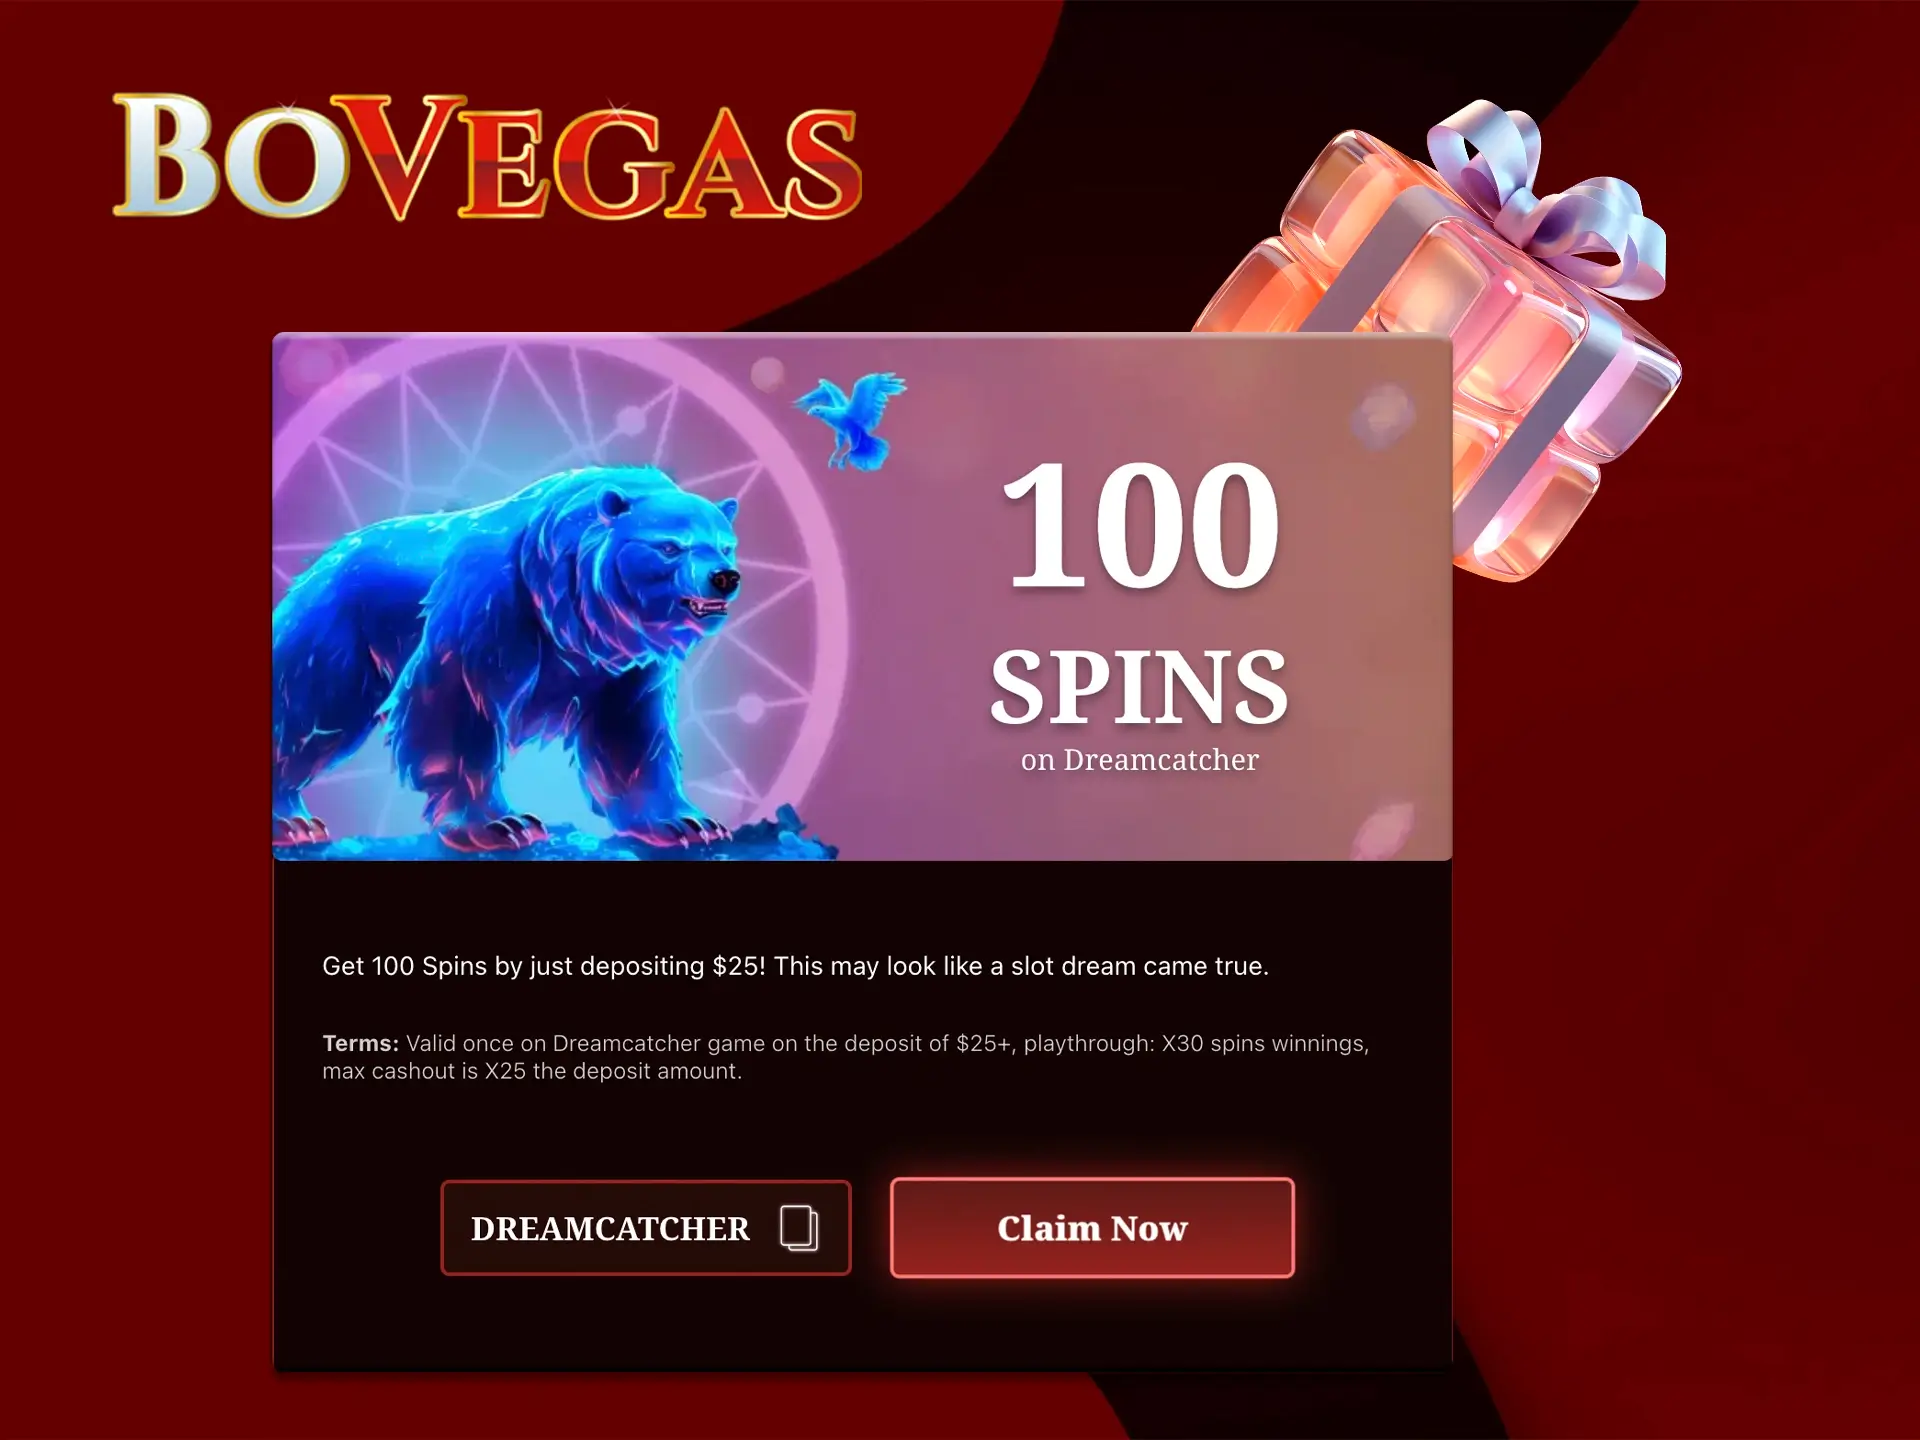 Catch a bear when playing Dreamcatcher and get a big bonus from BoVegas Casino.